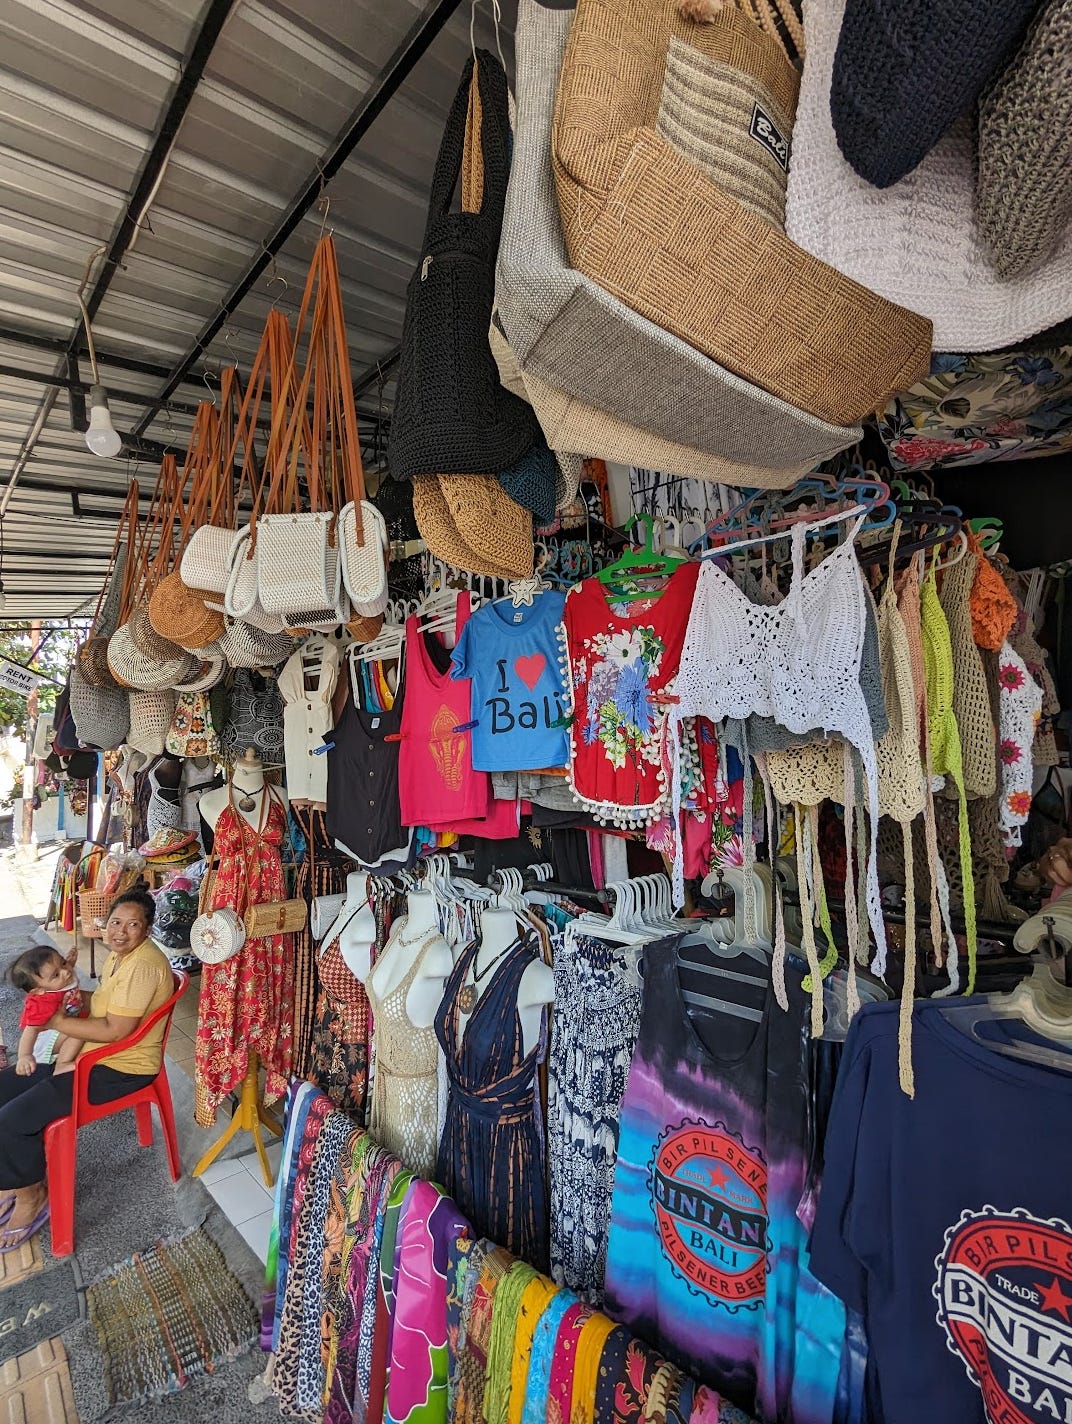 A shop with purses and clothes hanging from rods including a blue shirt that reads, "I <3 Bal". A woman sits on a red chair with a baby on her lap by the shop